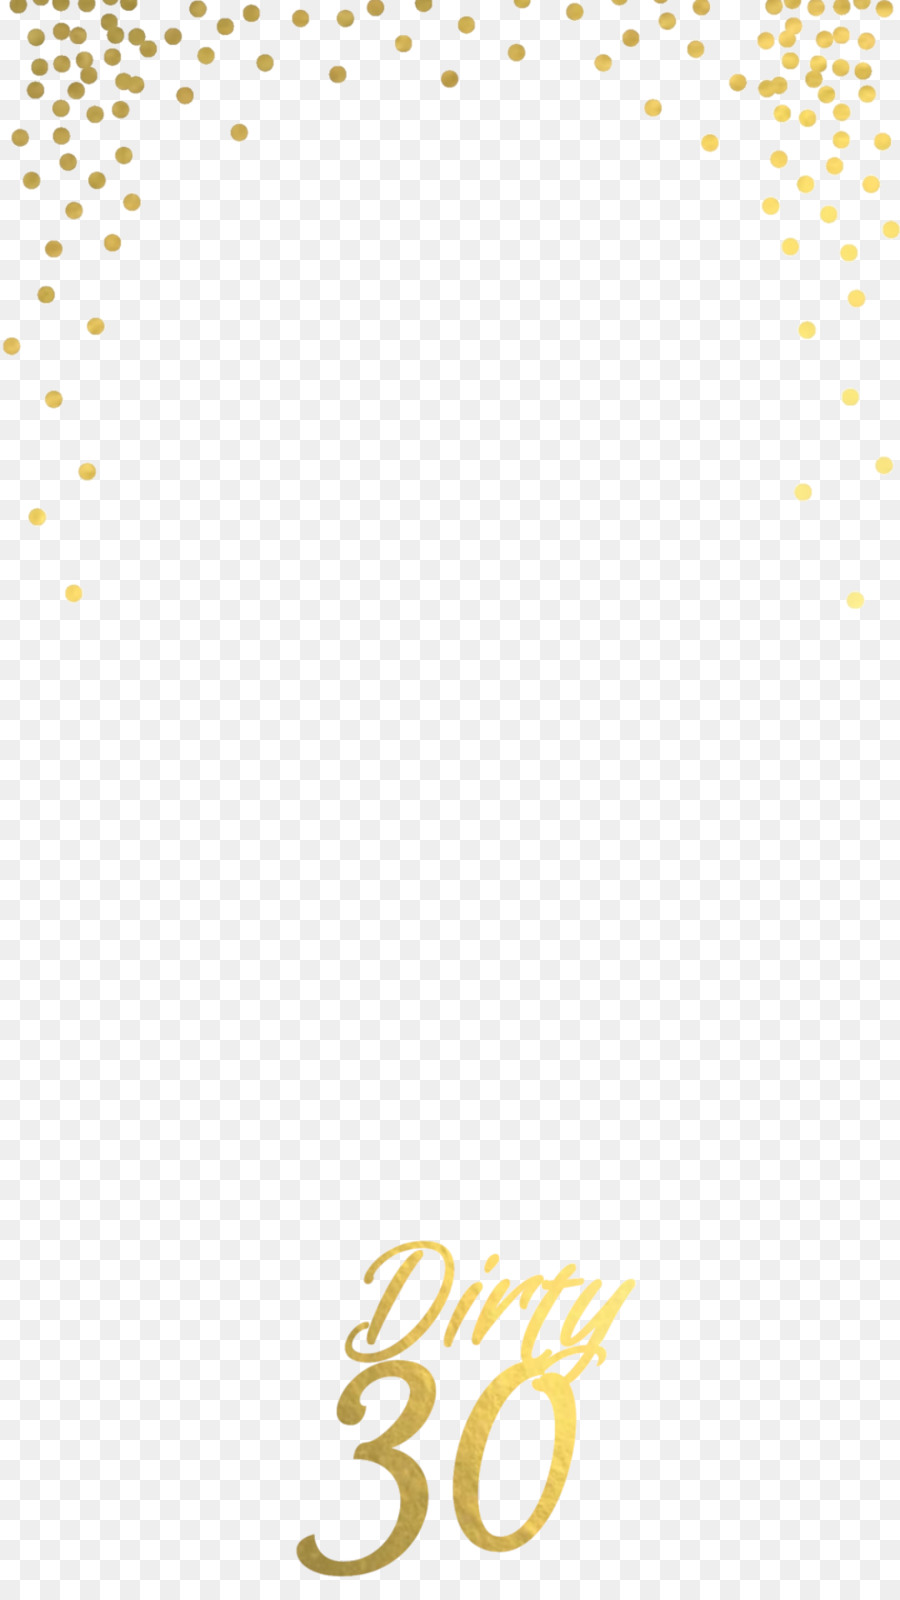 Marriage Snapchat Real Estate Goods - gold confetti png download - 1080*1920 - Free Transparent Marriage png Download.